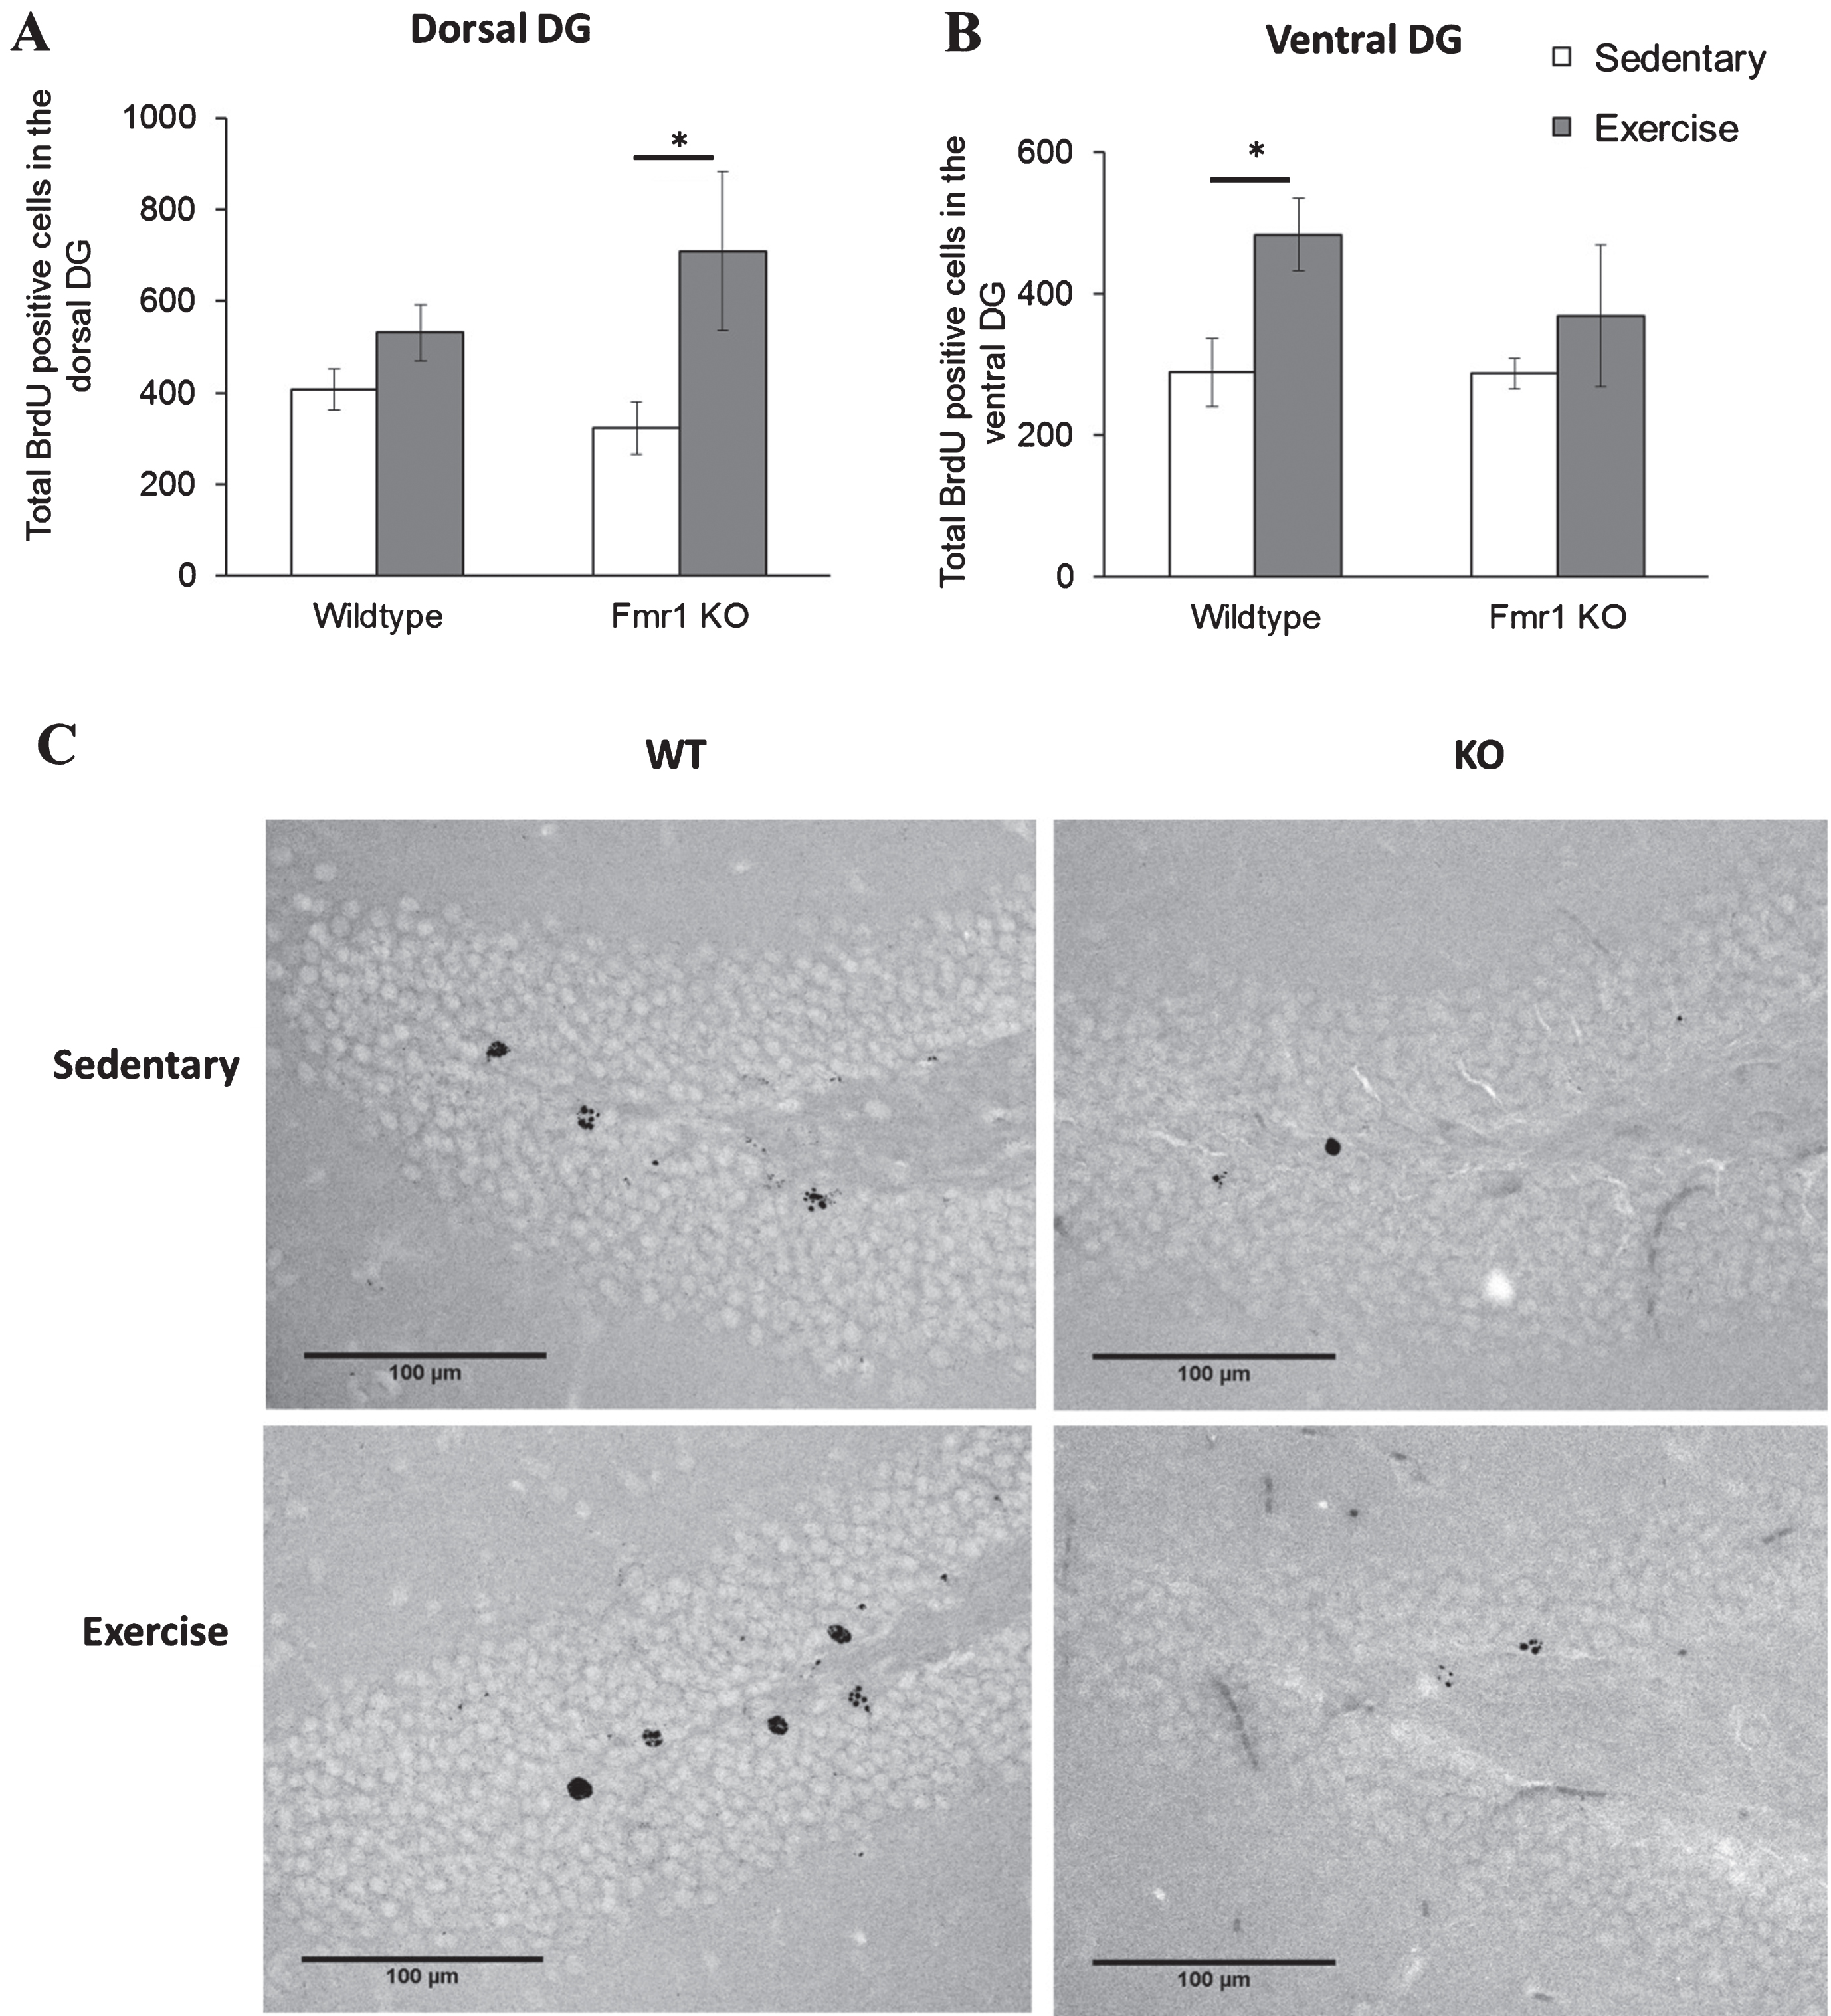 Chronic exercise modifies cell survival rate in FMR1 KO mice. (A) The number of BrdU-positive neurons in dorsal hippocampal dentate gyrus significantly increased after long term running paradigm in FMR1 KO mice. (B) In the ventral dentate gyrus, running did not modify cell survival in the FMR1 KO mice, while in WT animals there was a significant increase in BrdU-positive cells (*p < 0.05). (C) Representative images of BrdU-positive cells in the hippocampal dentate gyrus. Scale bar: 100μm.